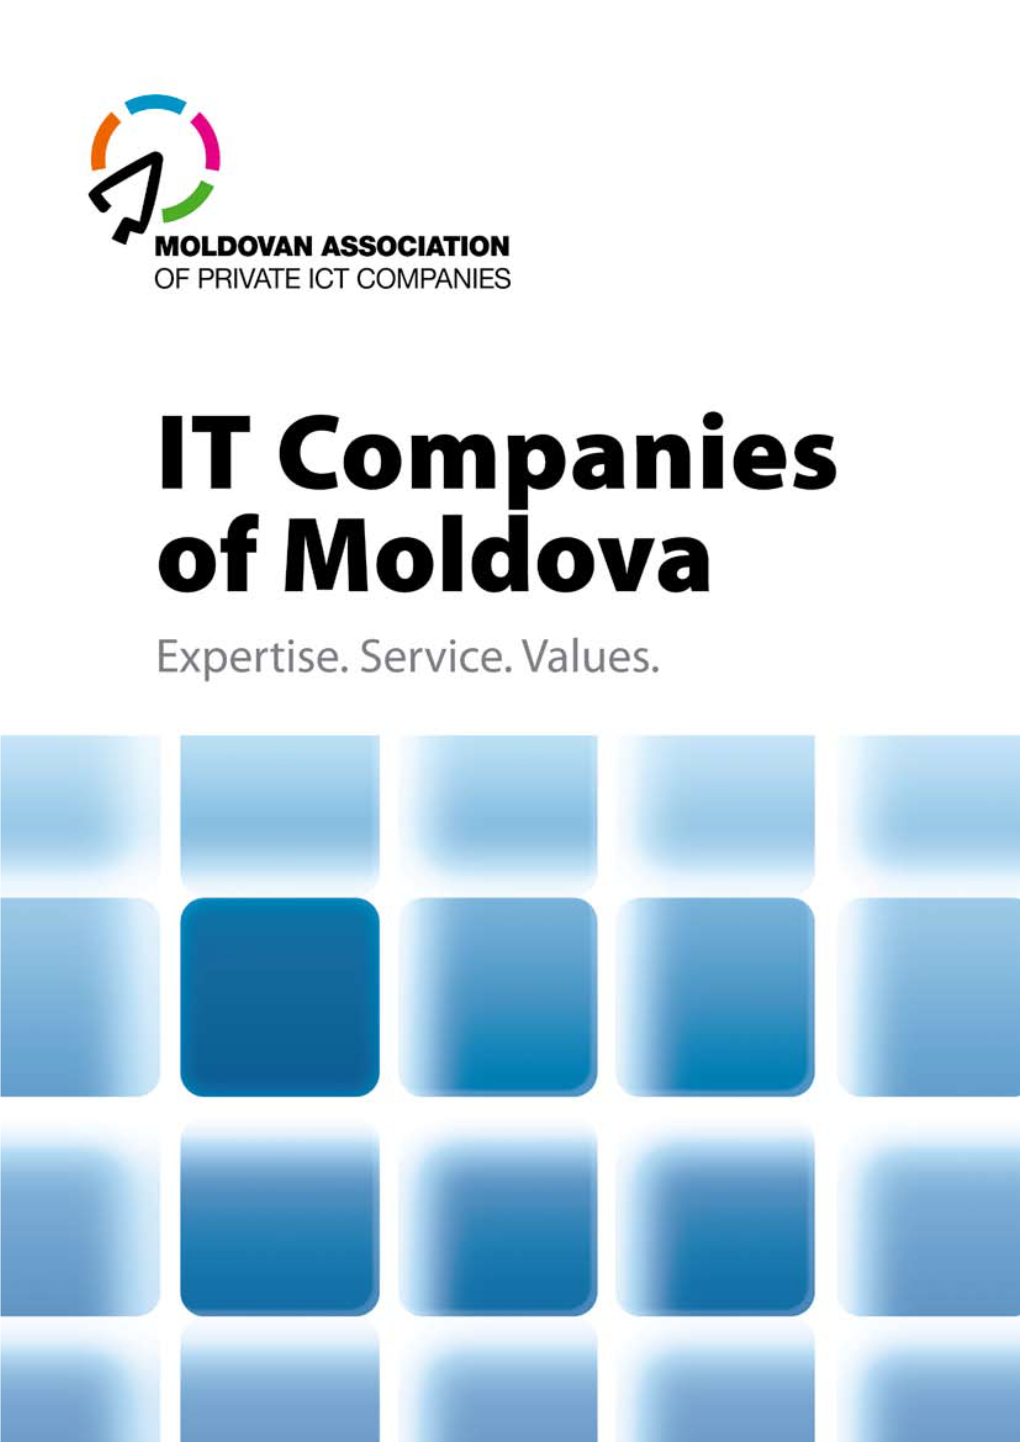 About Moldova 1 Why Outsource to Moldova 2 Partners of the Project MIEPO / National Association of Private ICT Companies 3 Company Index 4